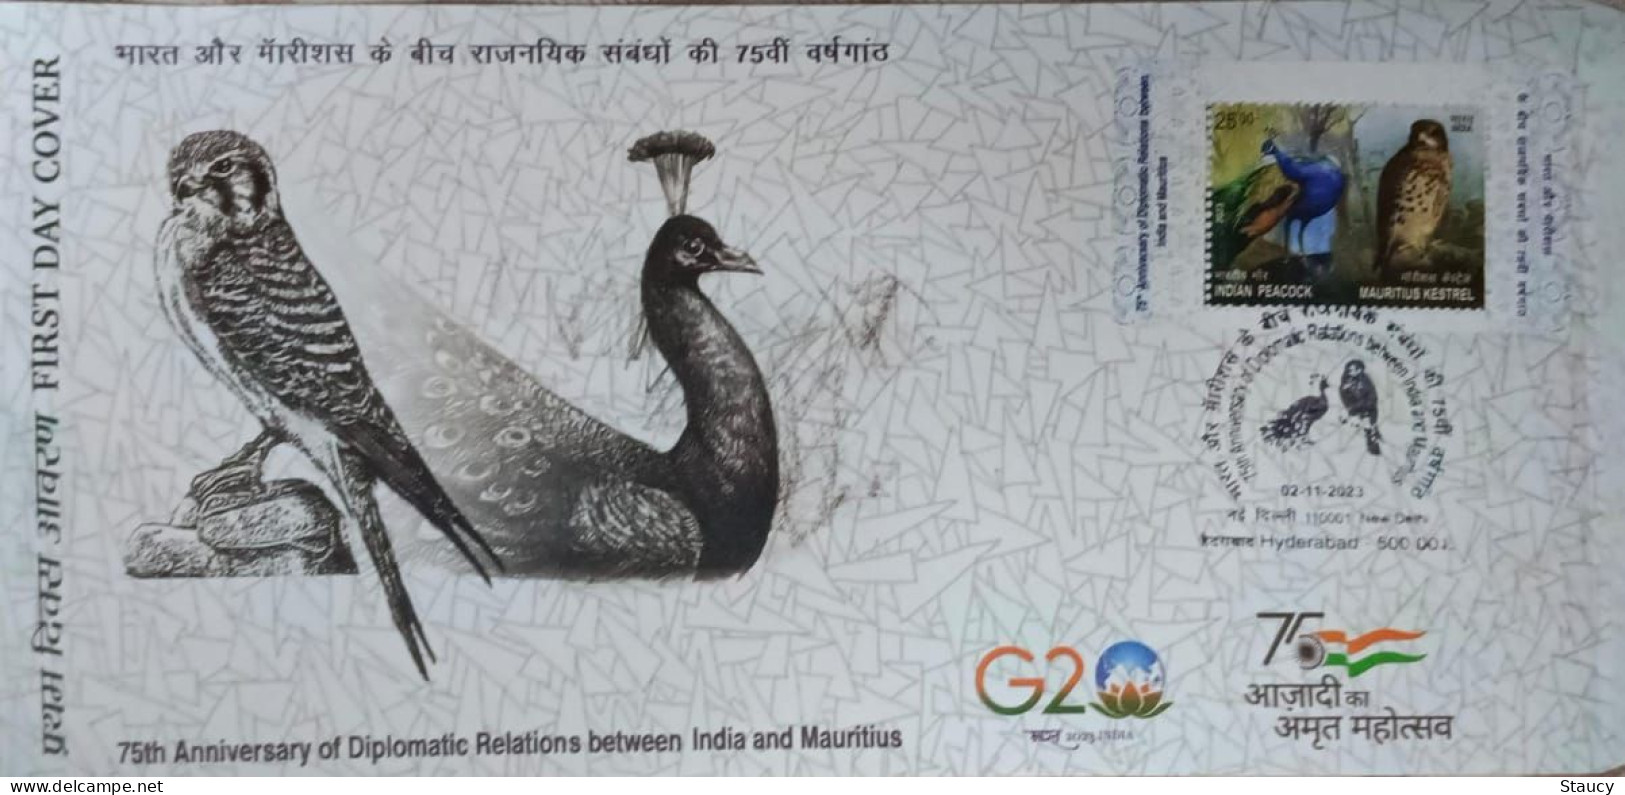 India 2023 Complete Year Collection of 47 FIRST DAY COVER'S FDC'S year Pack as per scan RARE to get